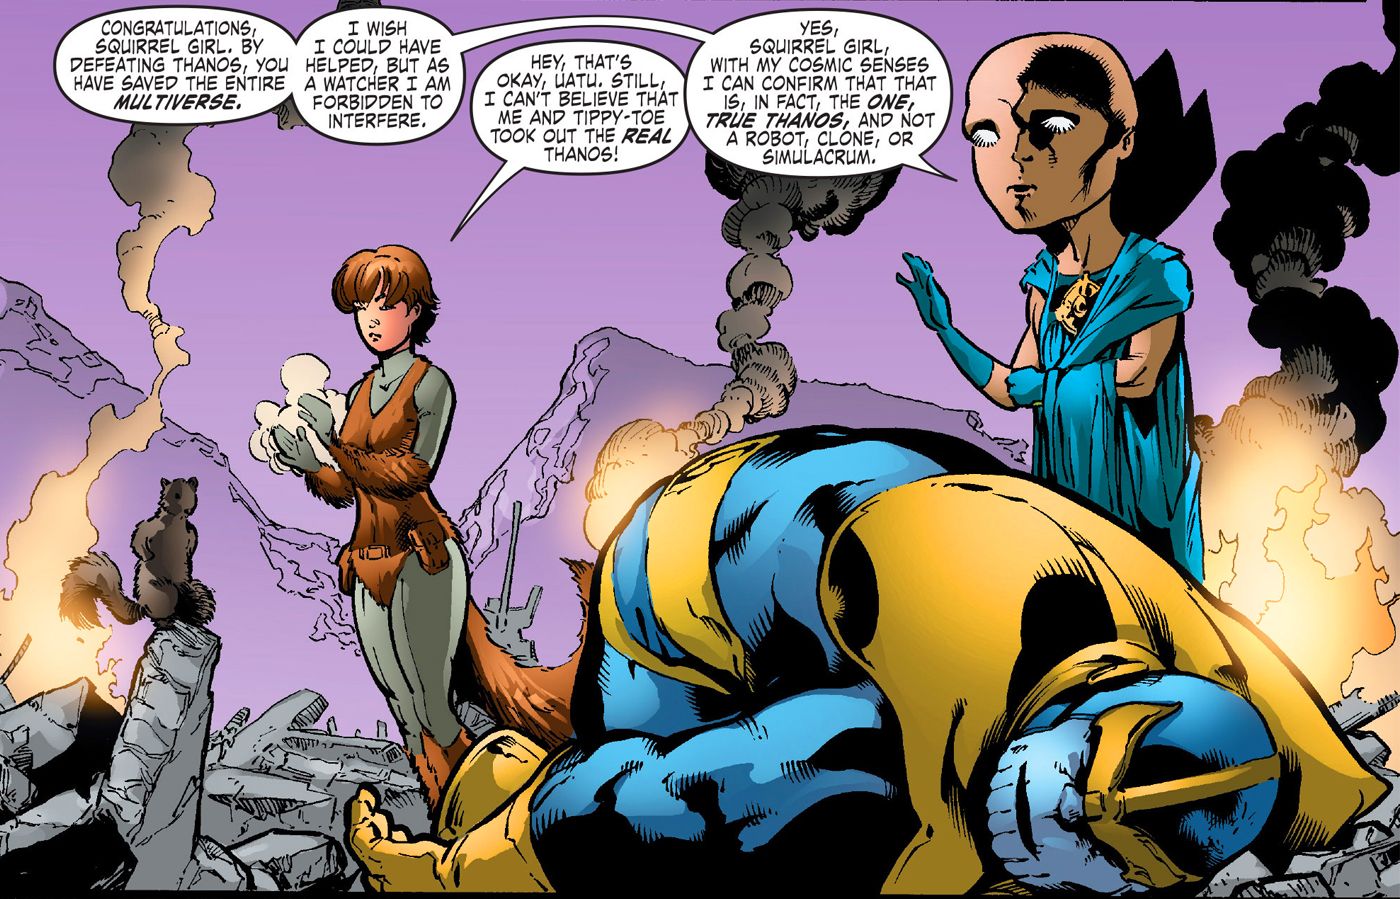 Squirrel Girl stands over Thanos after defeating him